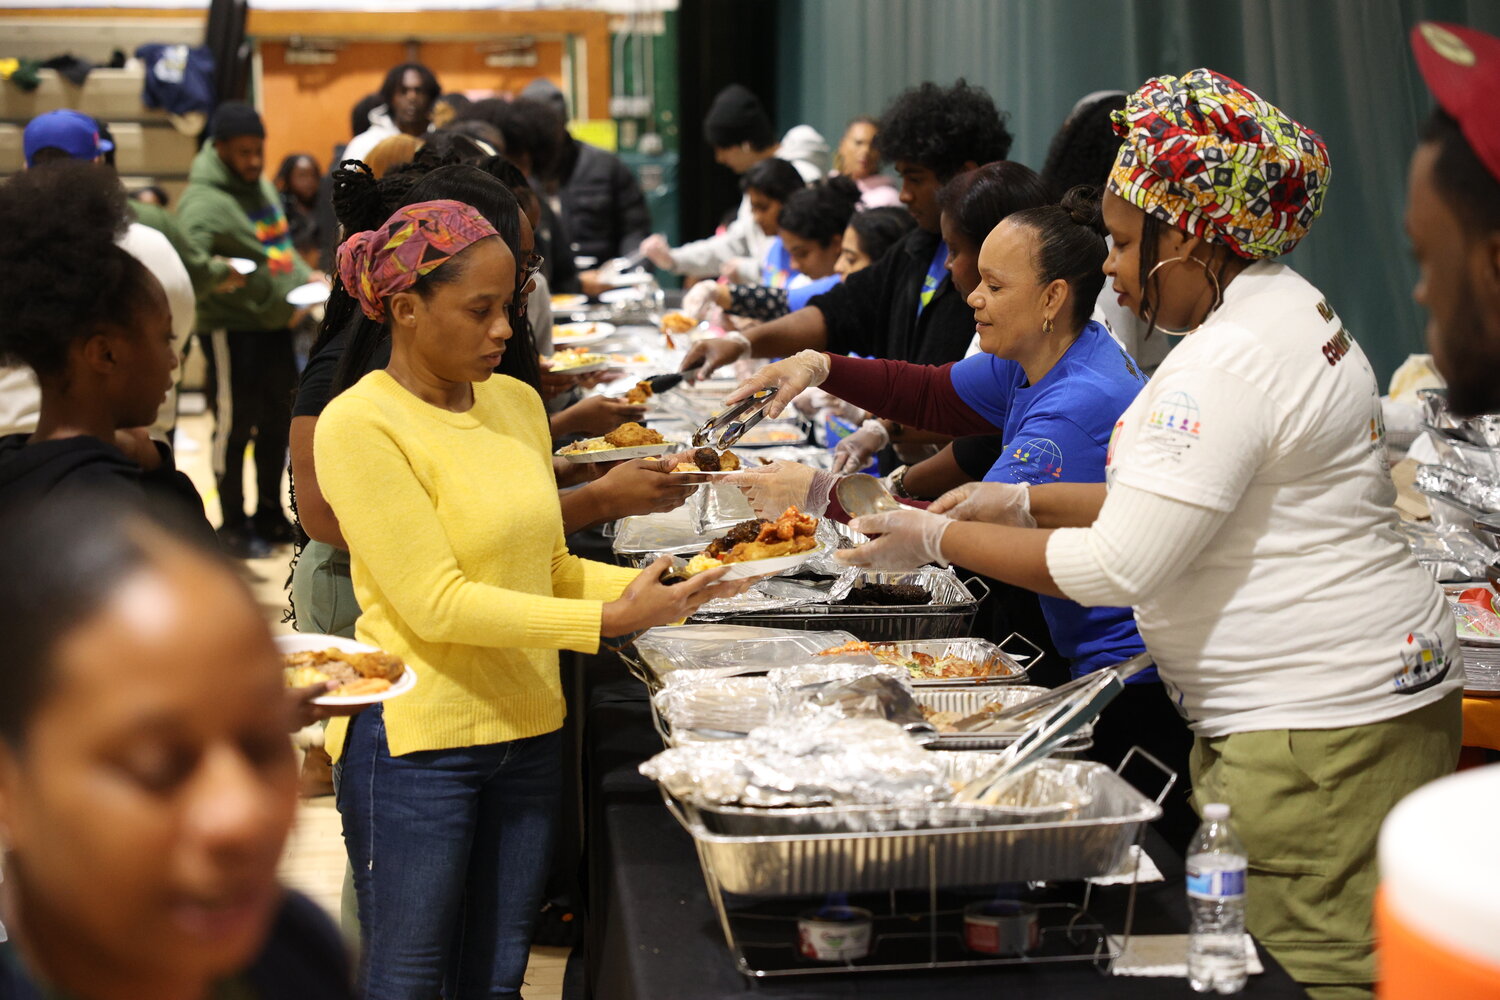 Neighbors dug in as they filled their plates with the help of volunteers at the event last weekend.